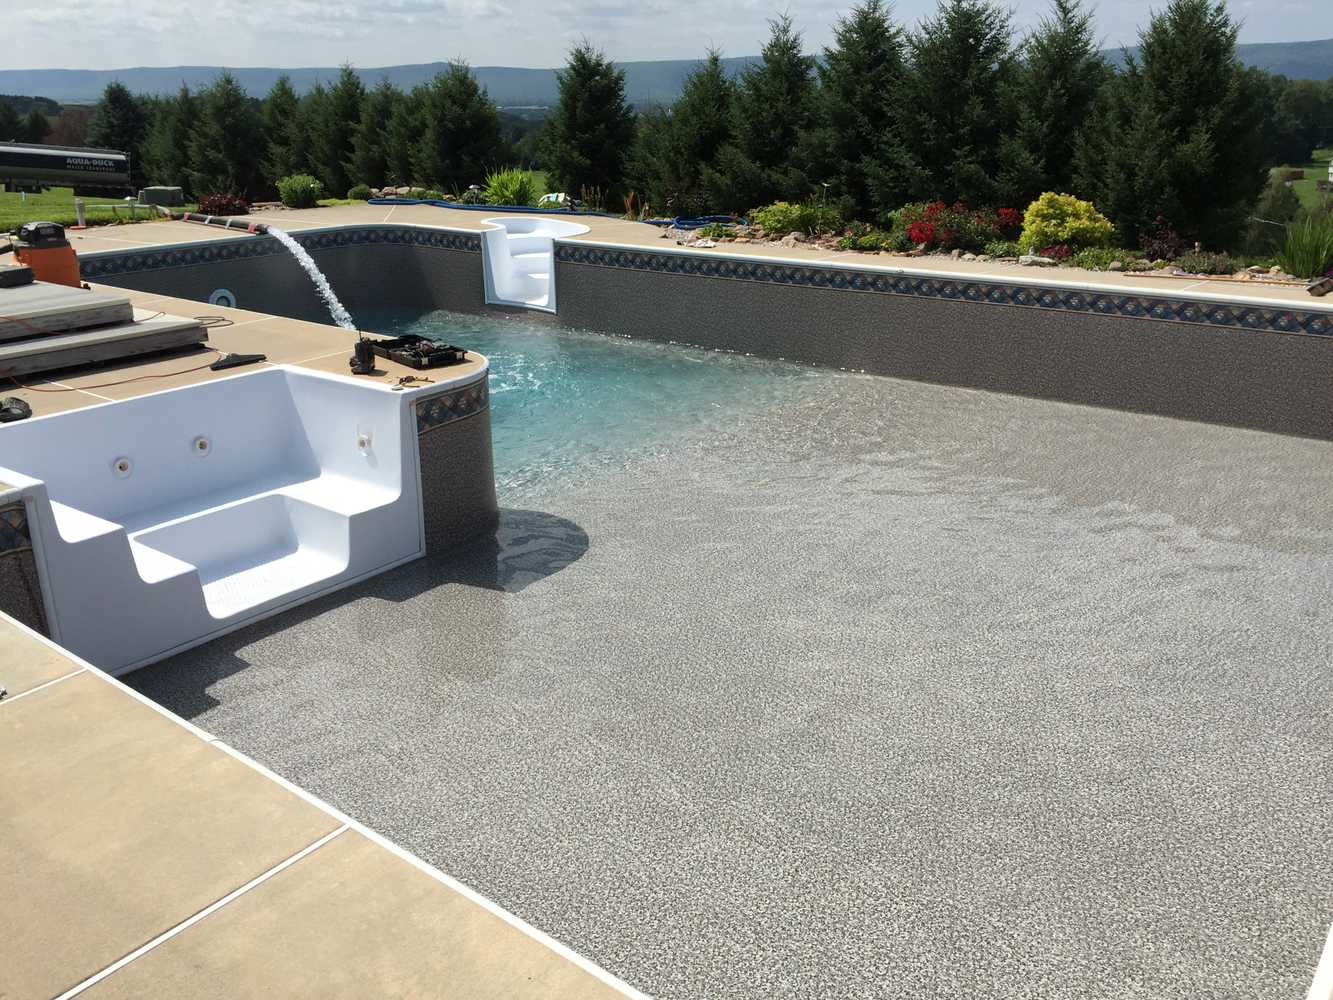 Photos from Jl Pool & Spa Services, Llc